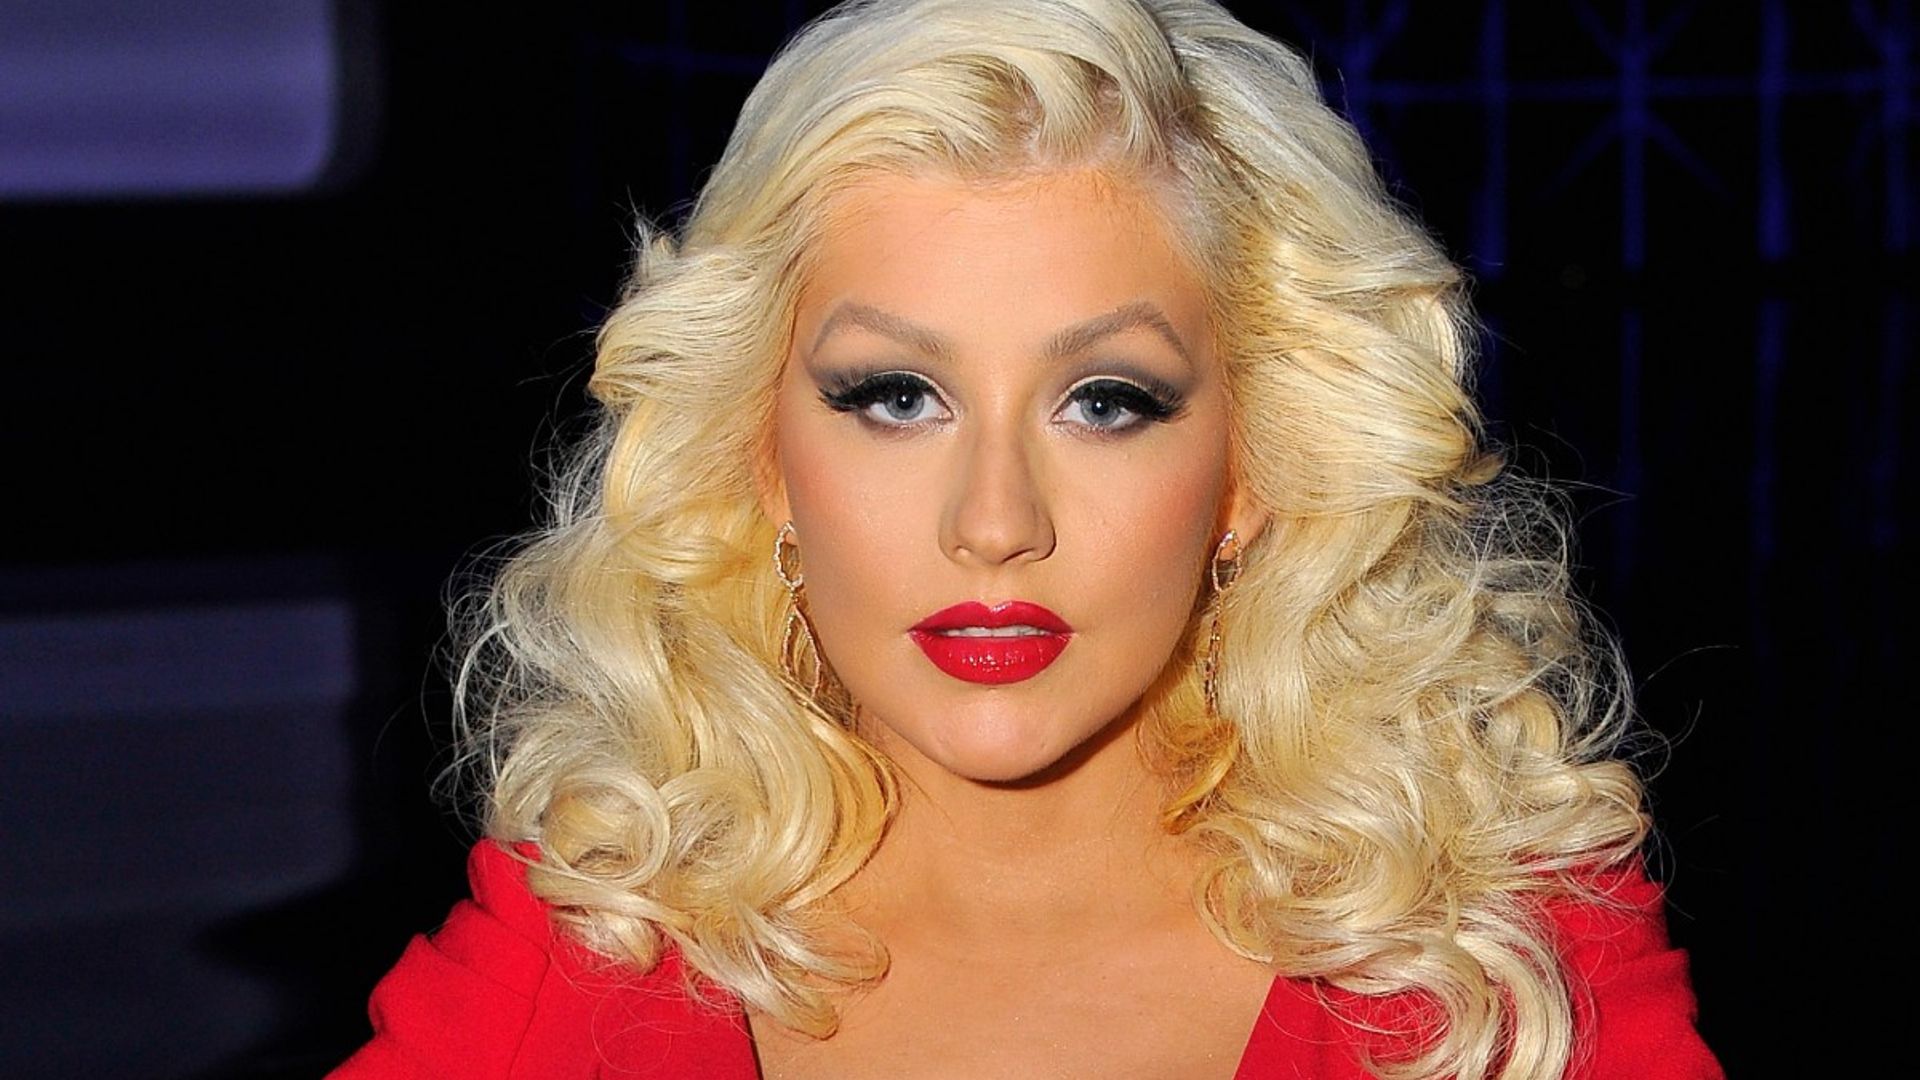 Christina Aguilera celebrates special Disney anniversary with a fairytale bridal look